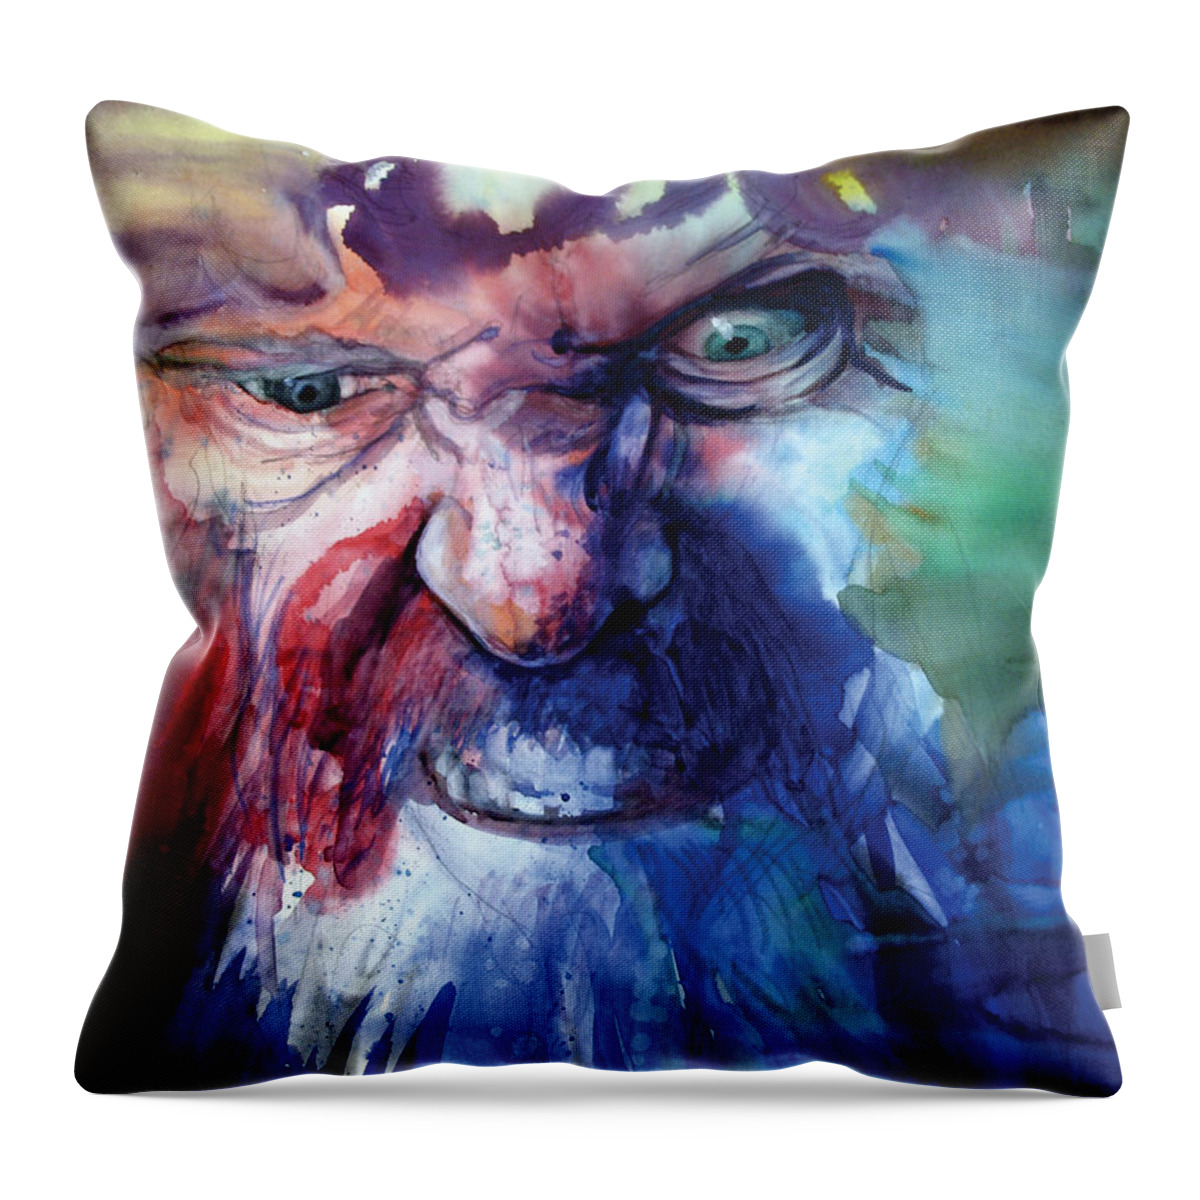 Emotions Throw Pillow featuring the painting Wizzlewump by Frank Robert Dixon